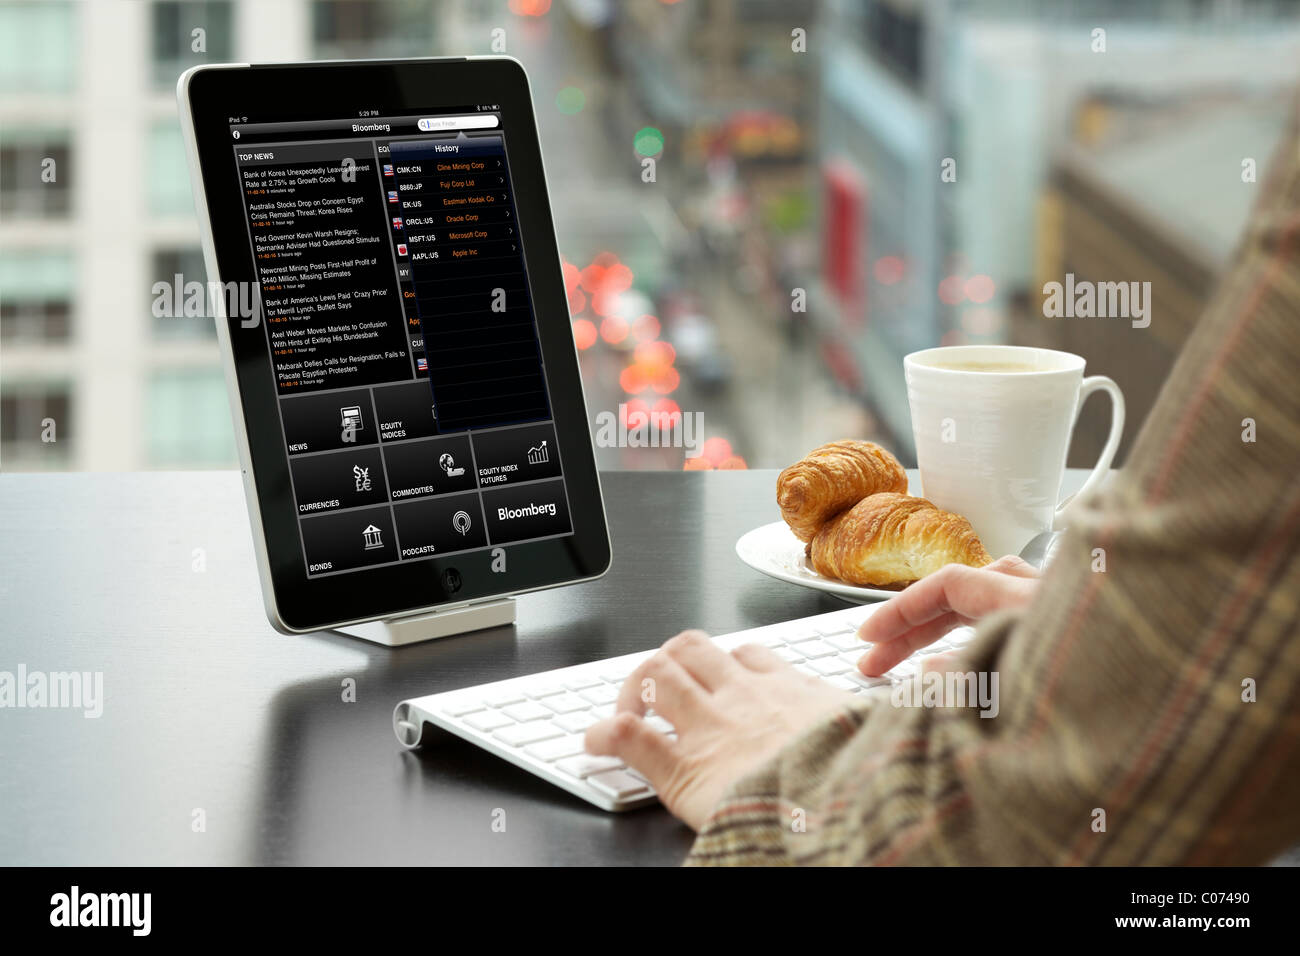 Business woman analyzing FTSE 100 Index financial information with Bloomberg iPad app at an office Stock Photo